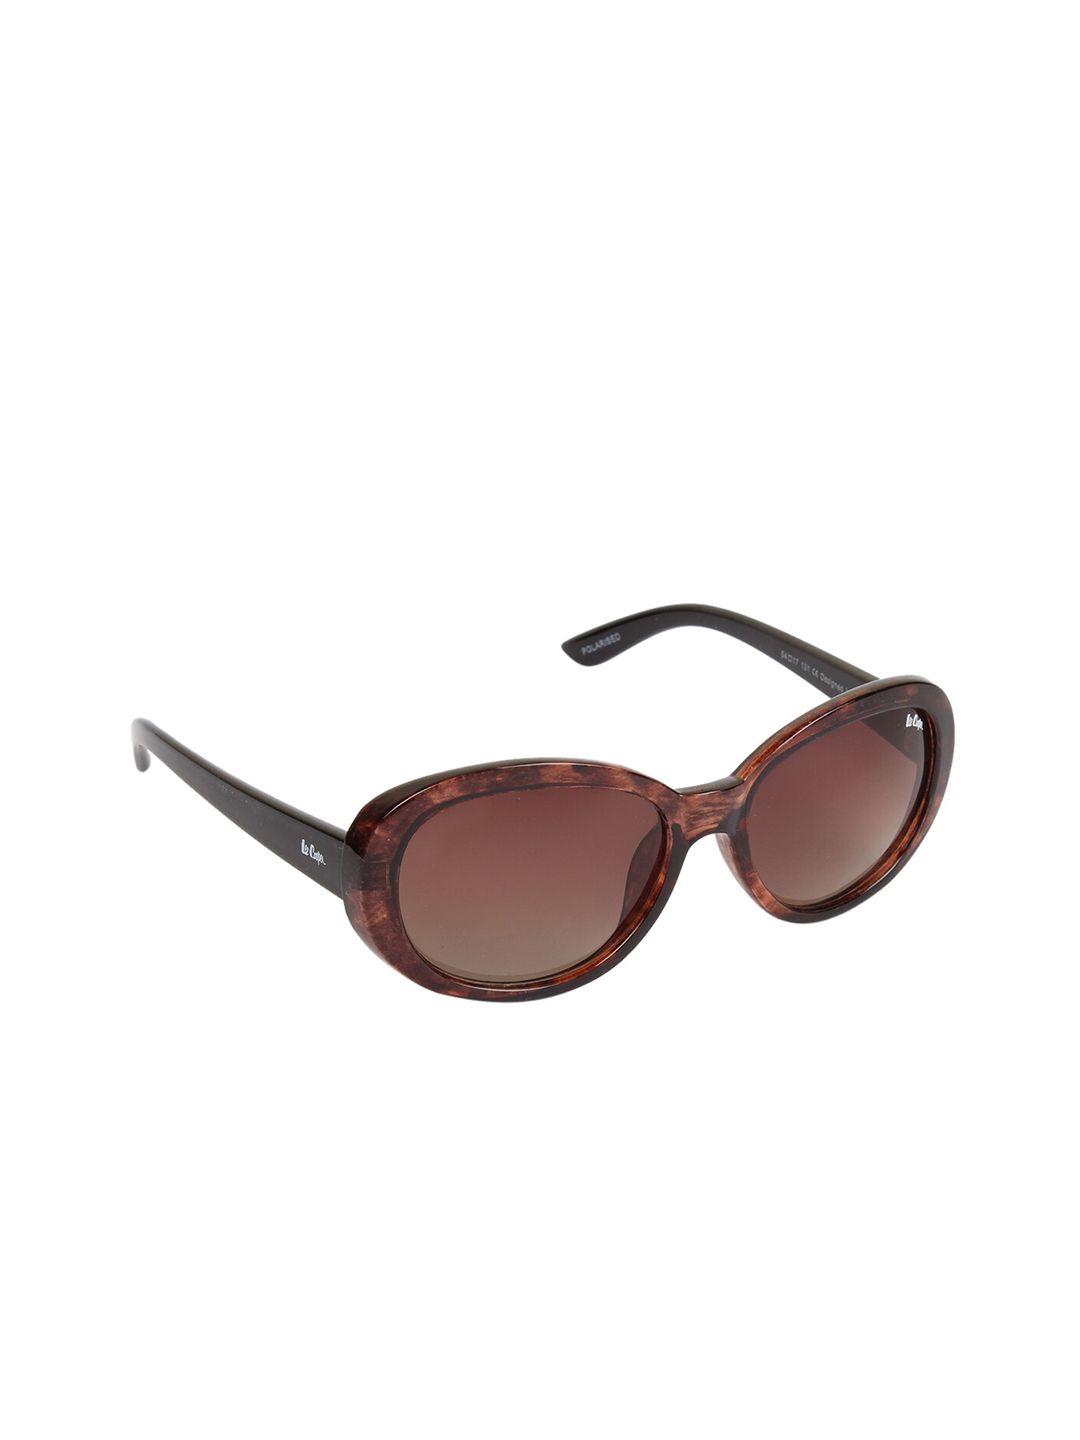 Lee Cooper Women Brown Lens & Brown Oval Sunglasses Polarised Lens LC9165NTBPOL BRNFLW Price in India